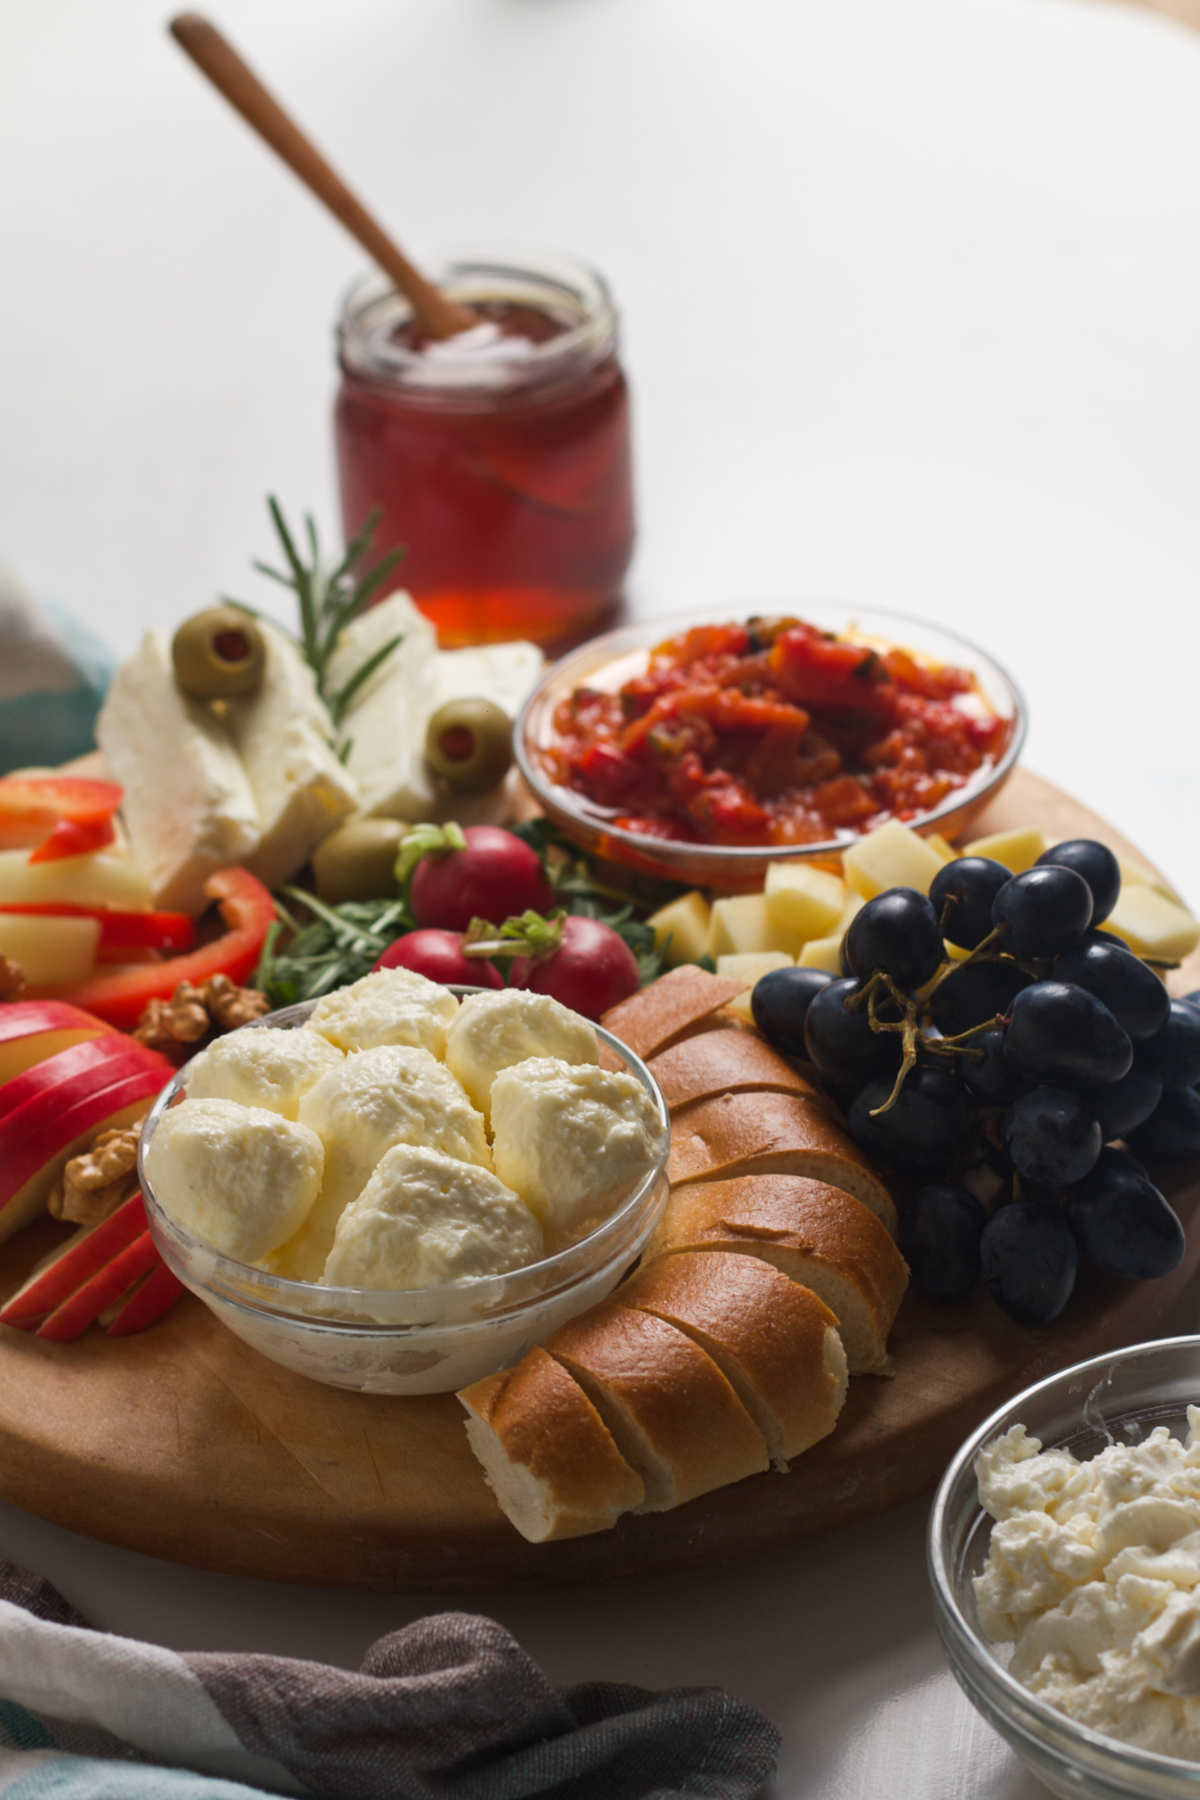 Wooden, round tray filled with different ingredients like ajvar, cheese, bread, grapes, meat, with a jar of honey in the distance.